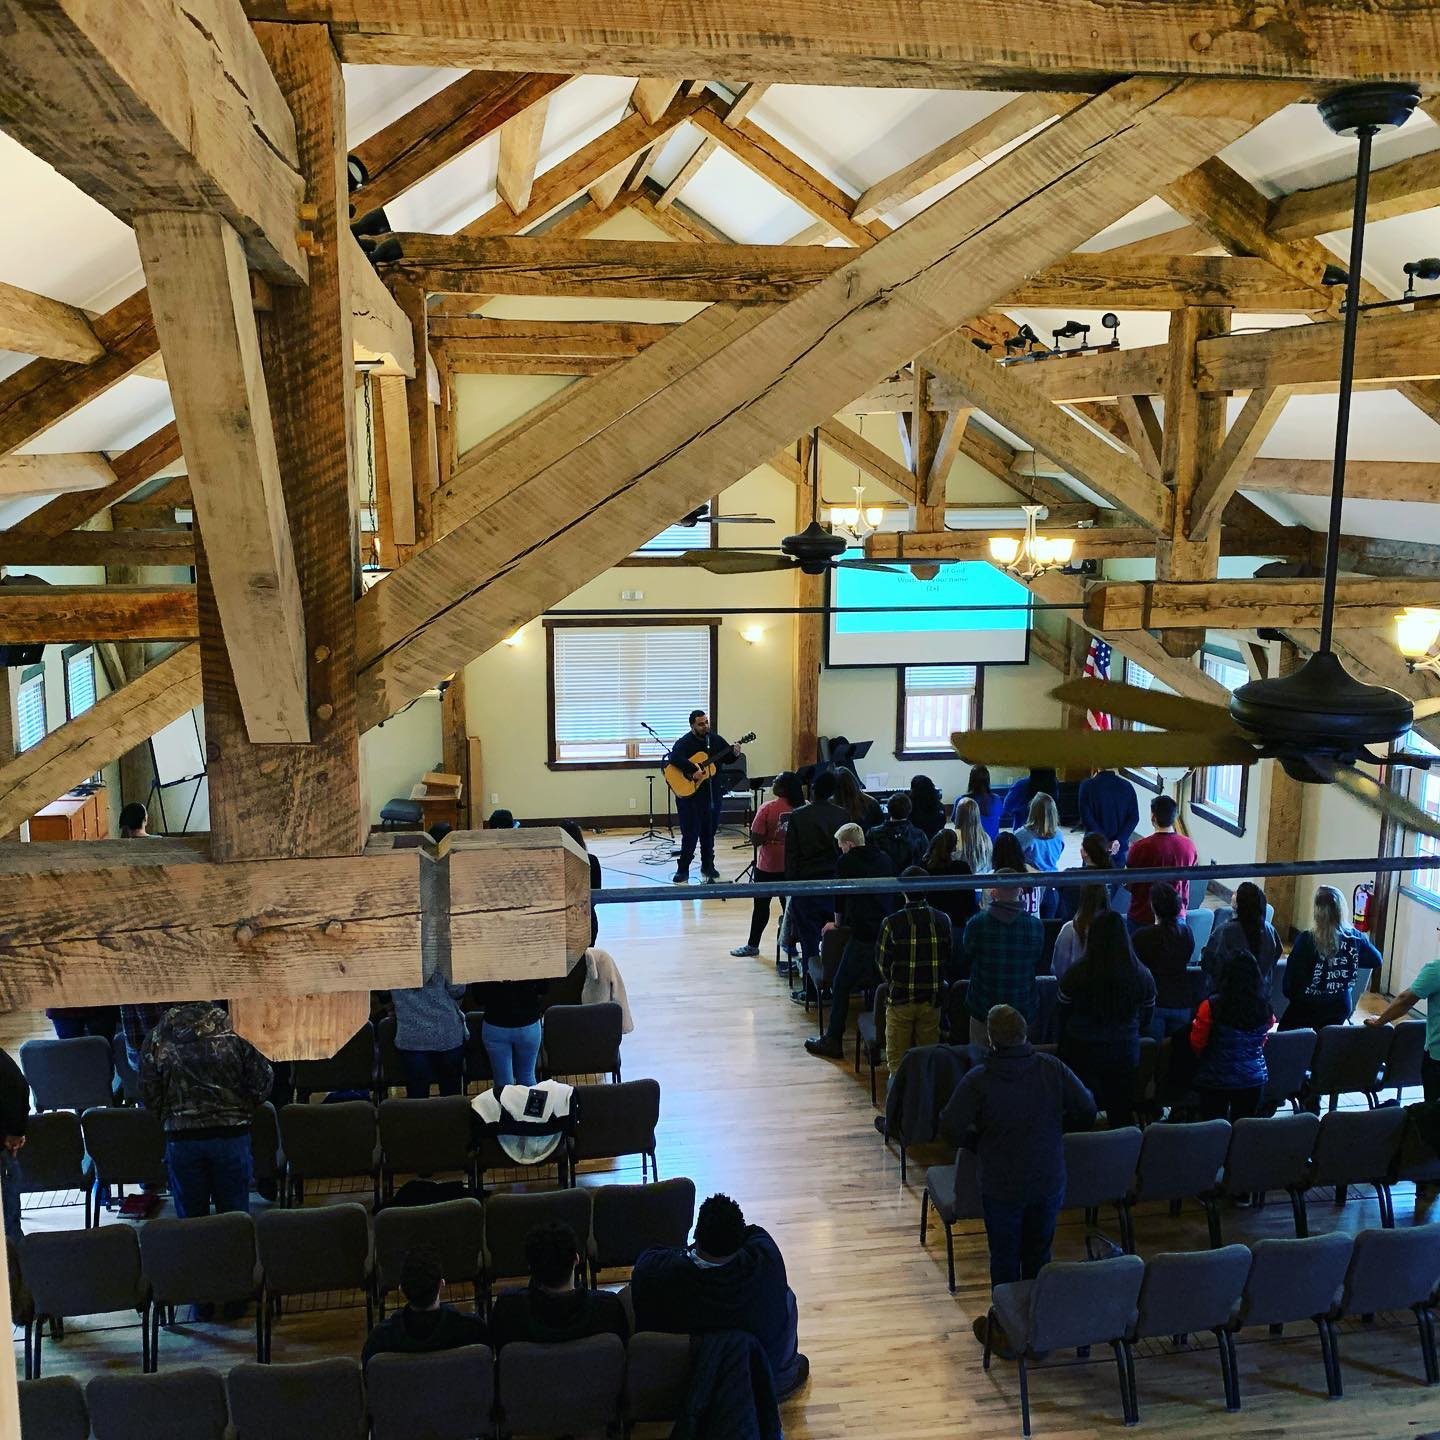 Some shots from our Morning Session in Chapel Barn at the College and Career Retreat! #campiroquoina #winterretreats2020 #iroqcnc2020